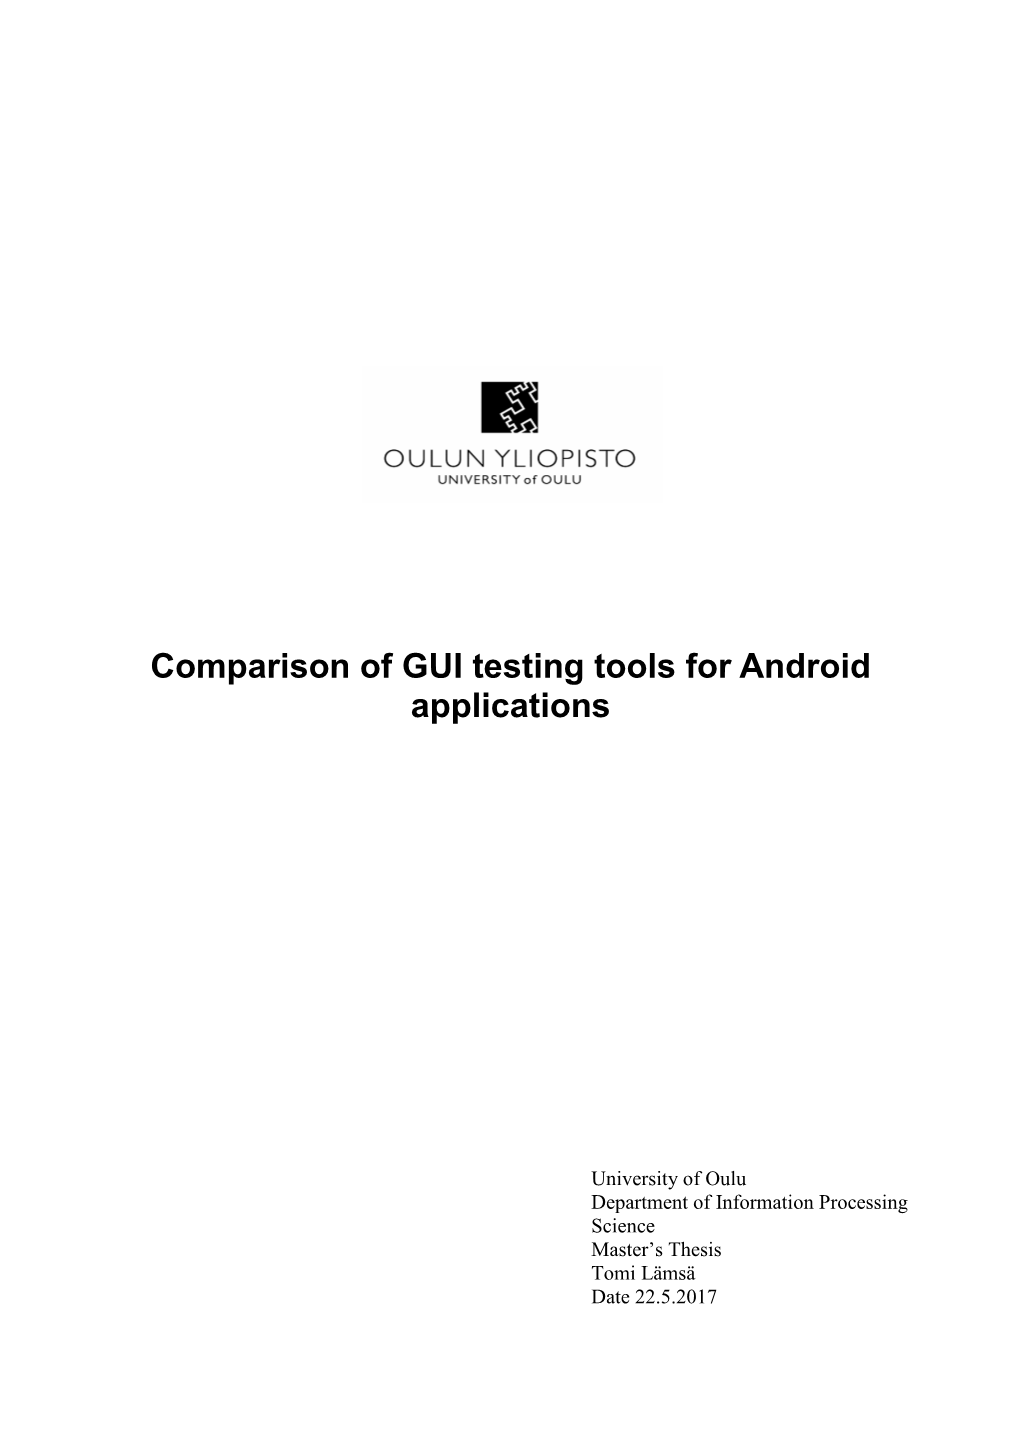 Comparison of GUI Testing Tools for Android Applications